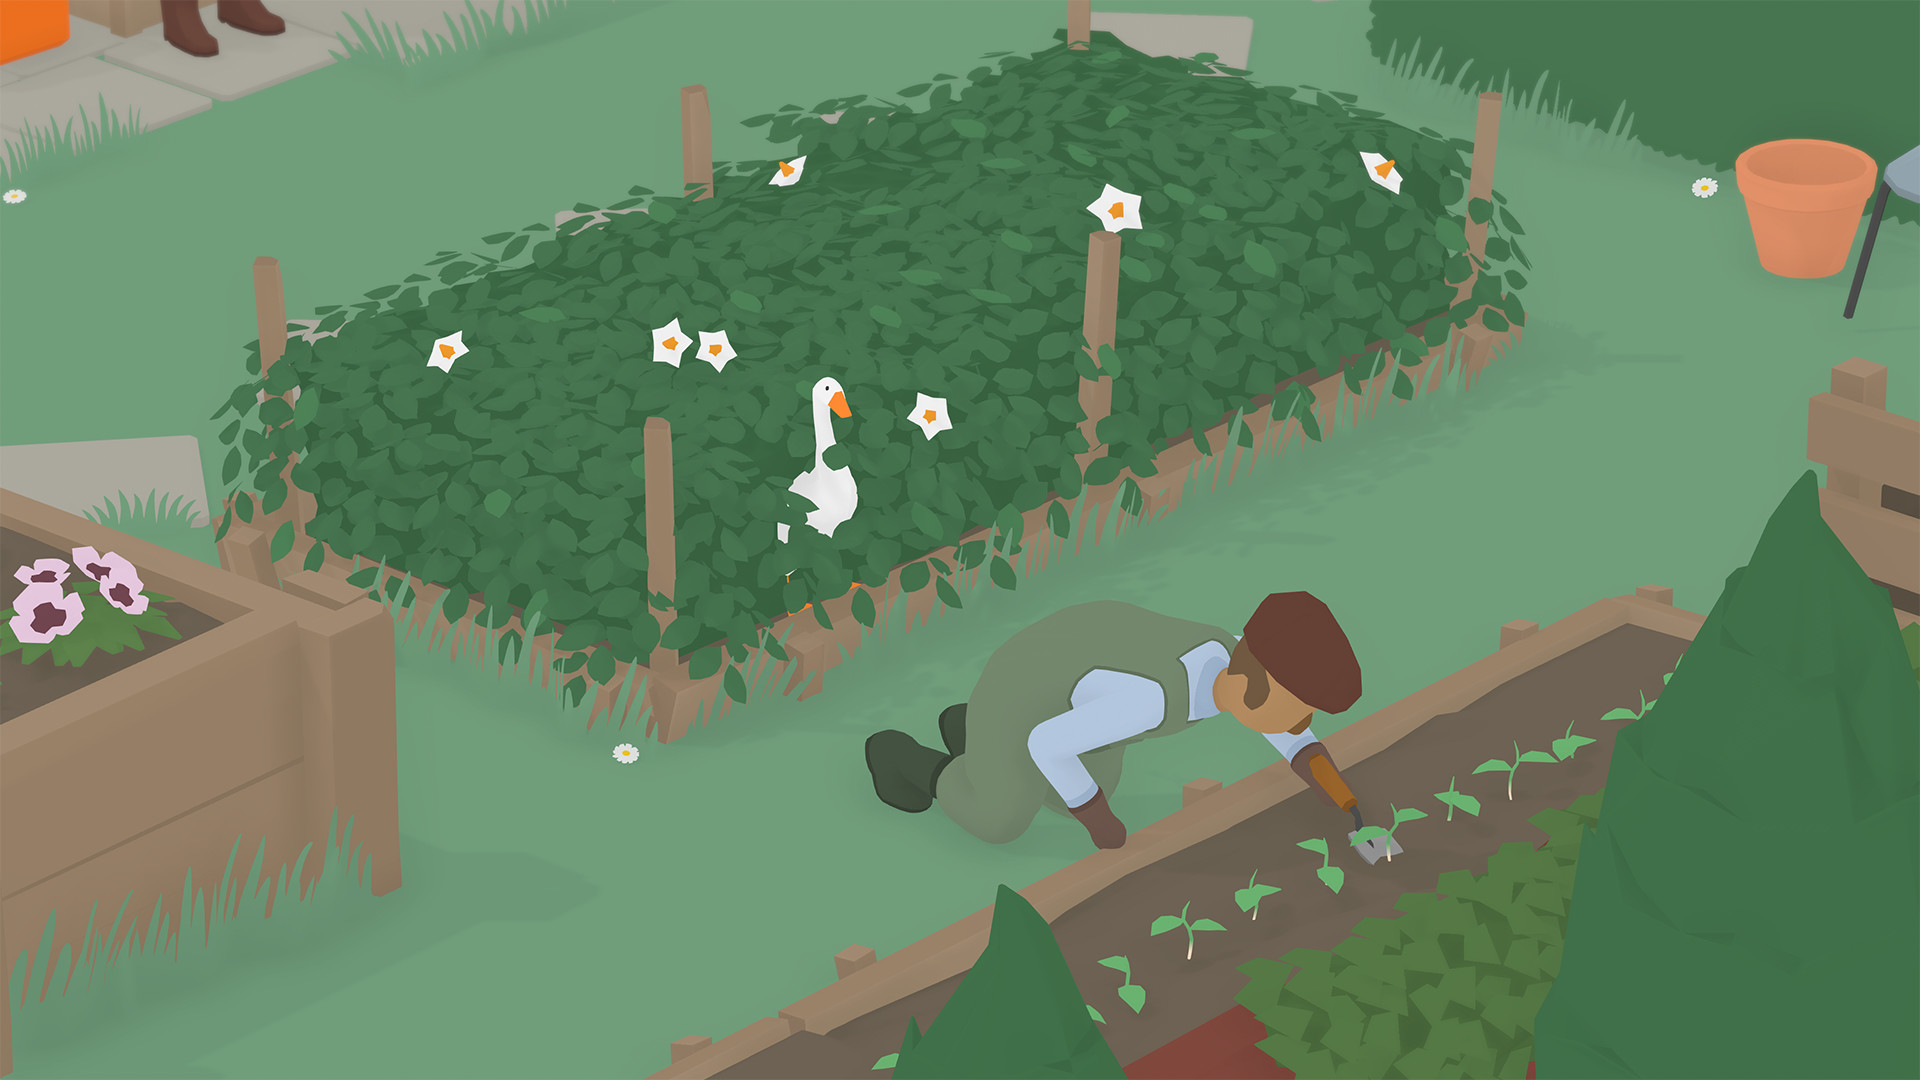 Untitled Goose Game free update adding local two-player co-op